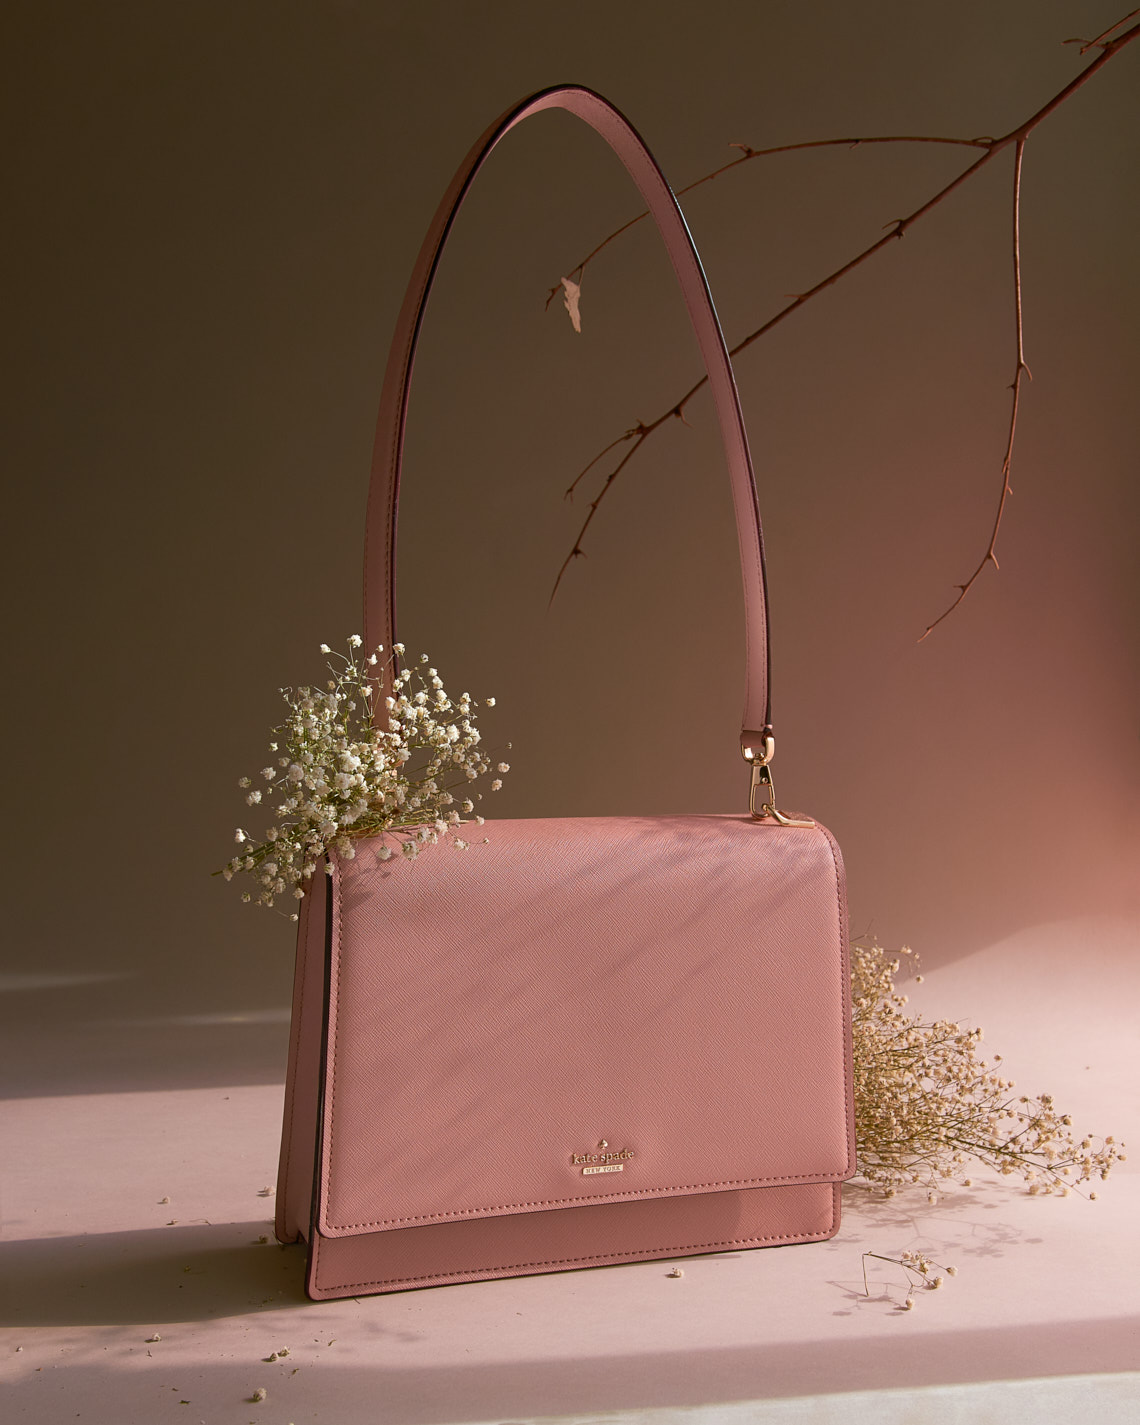 Kate Spade Pink Bag propped with wild flower lighted by window light